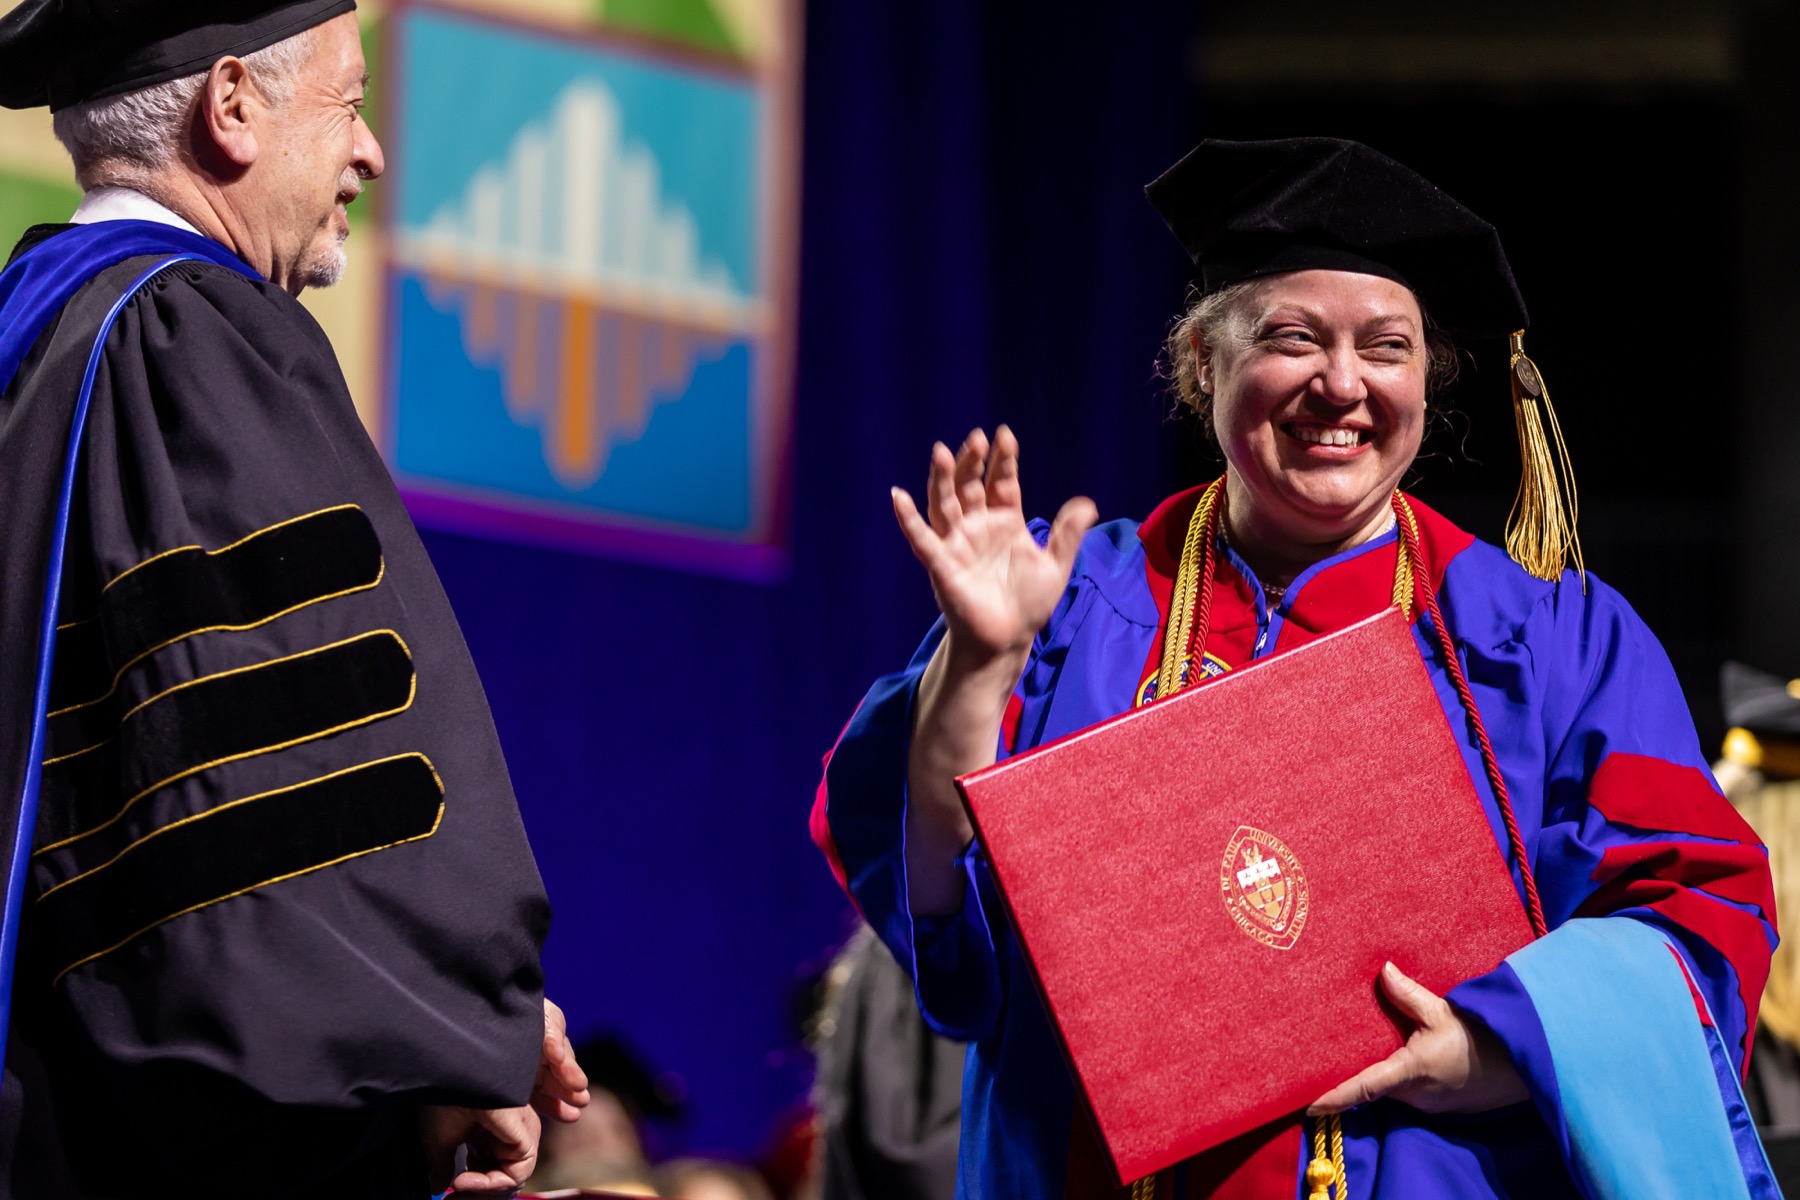 Nancy Hashimoto, College of Education director of advising, received her doctorate degree.